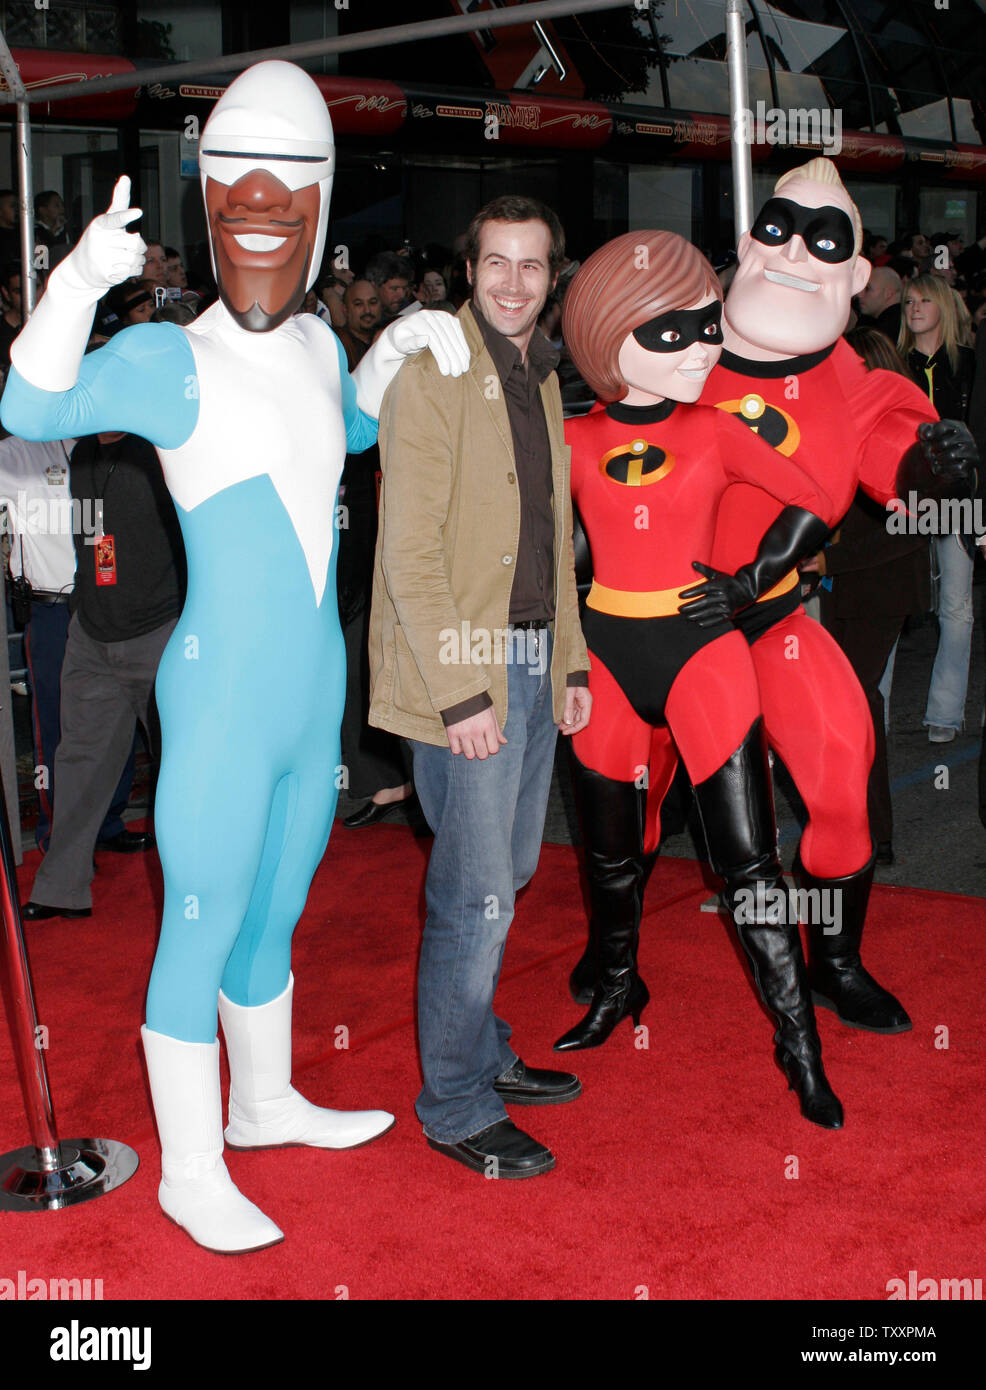 Actor Jason Lee, center, who is the voice of the character, 'Syndrome', poses for photographers with costumed actors at the premiere of the new animated film from Pixar, 'The Incredibles' at the El Capitan Theatre in Los Angeles,  October 24, 2004. The film opens in the United States November 5th. (UPI Photo/Francis Specker) Stock Photo